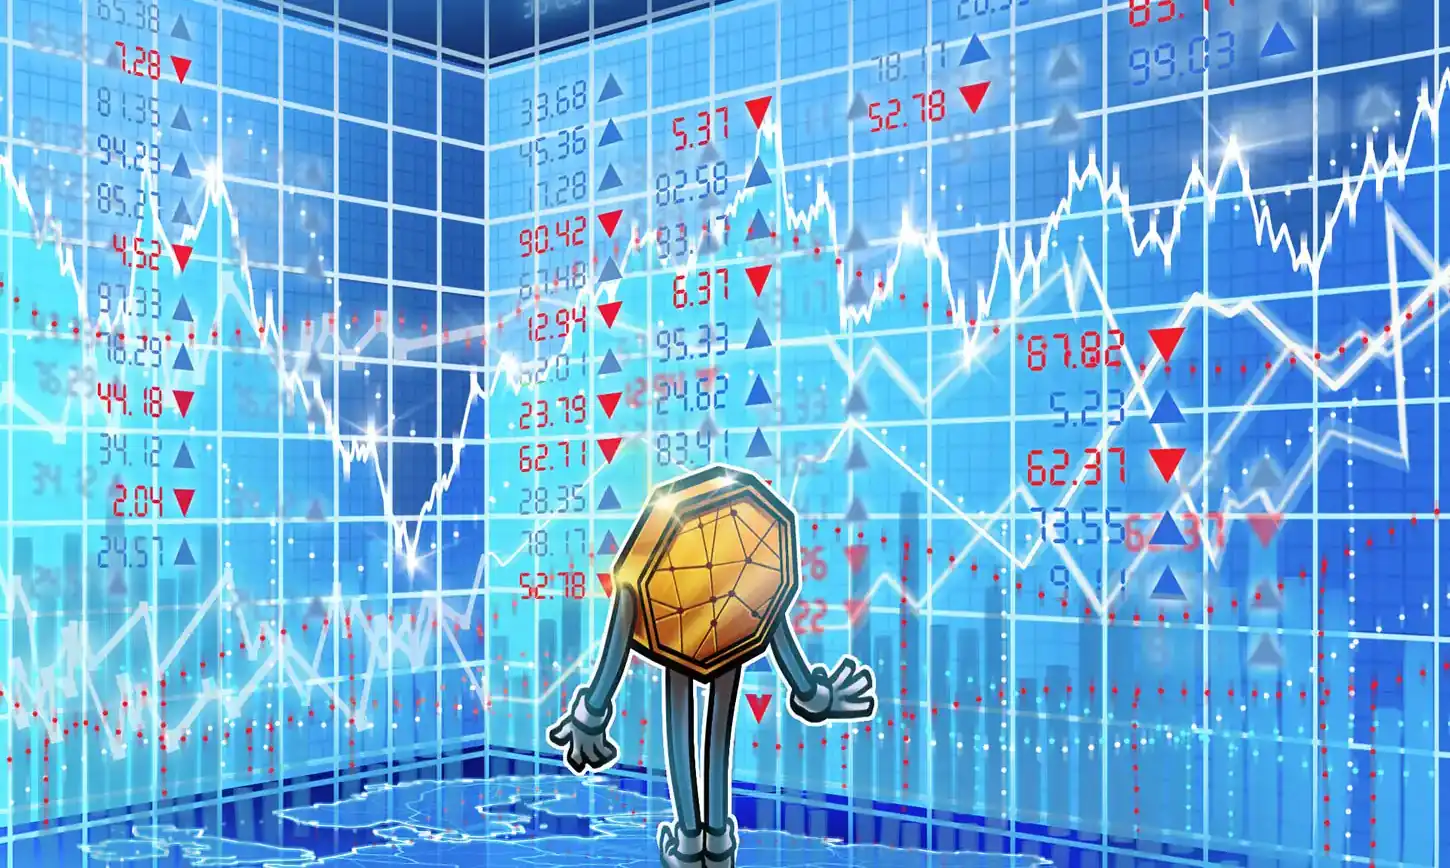 Crypto Market Update: Bitcoin Hits New All-Time High, Inflows Rise, and Short Liquidations Surge